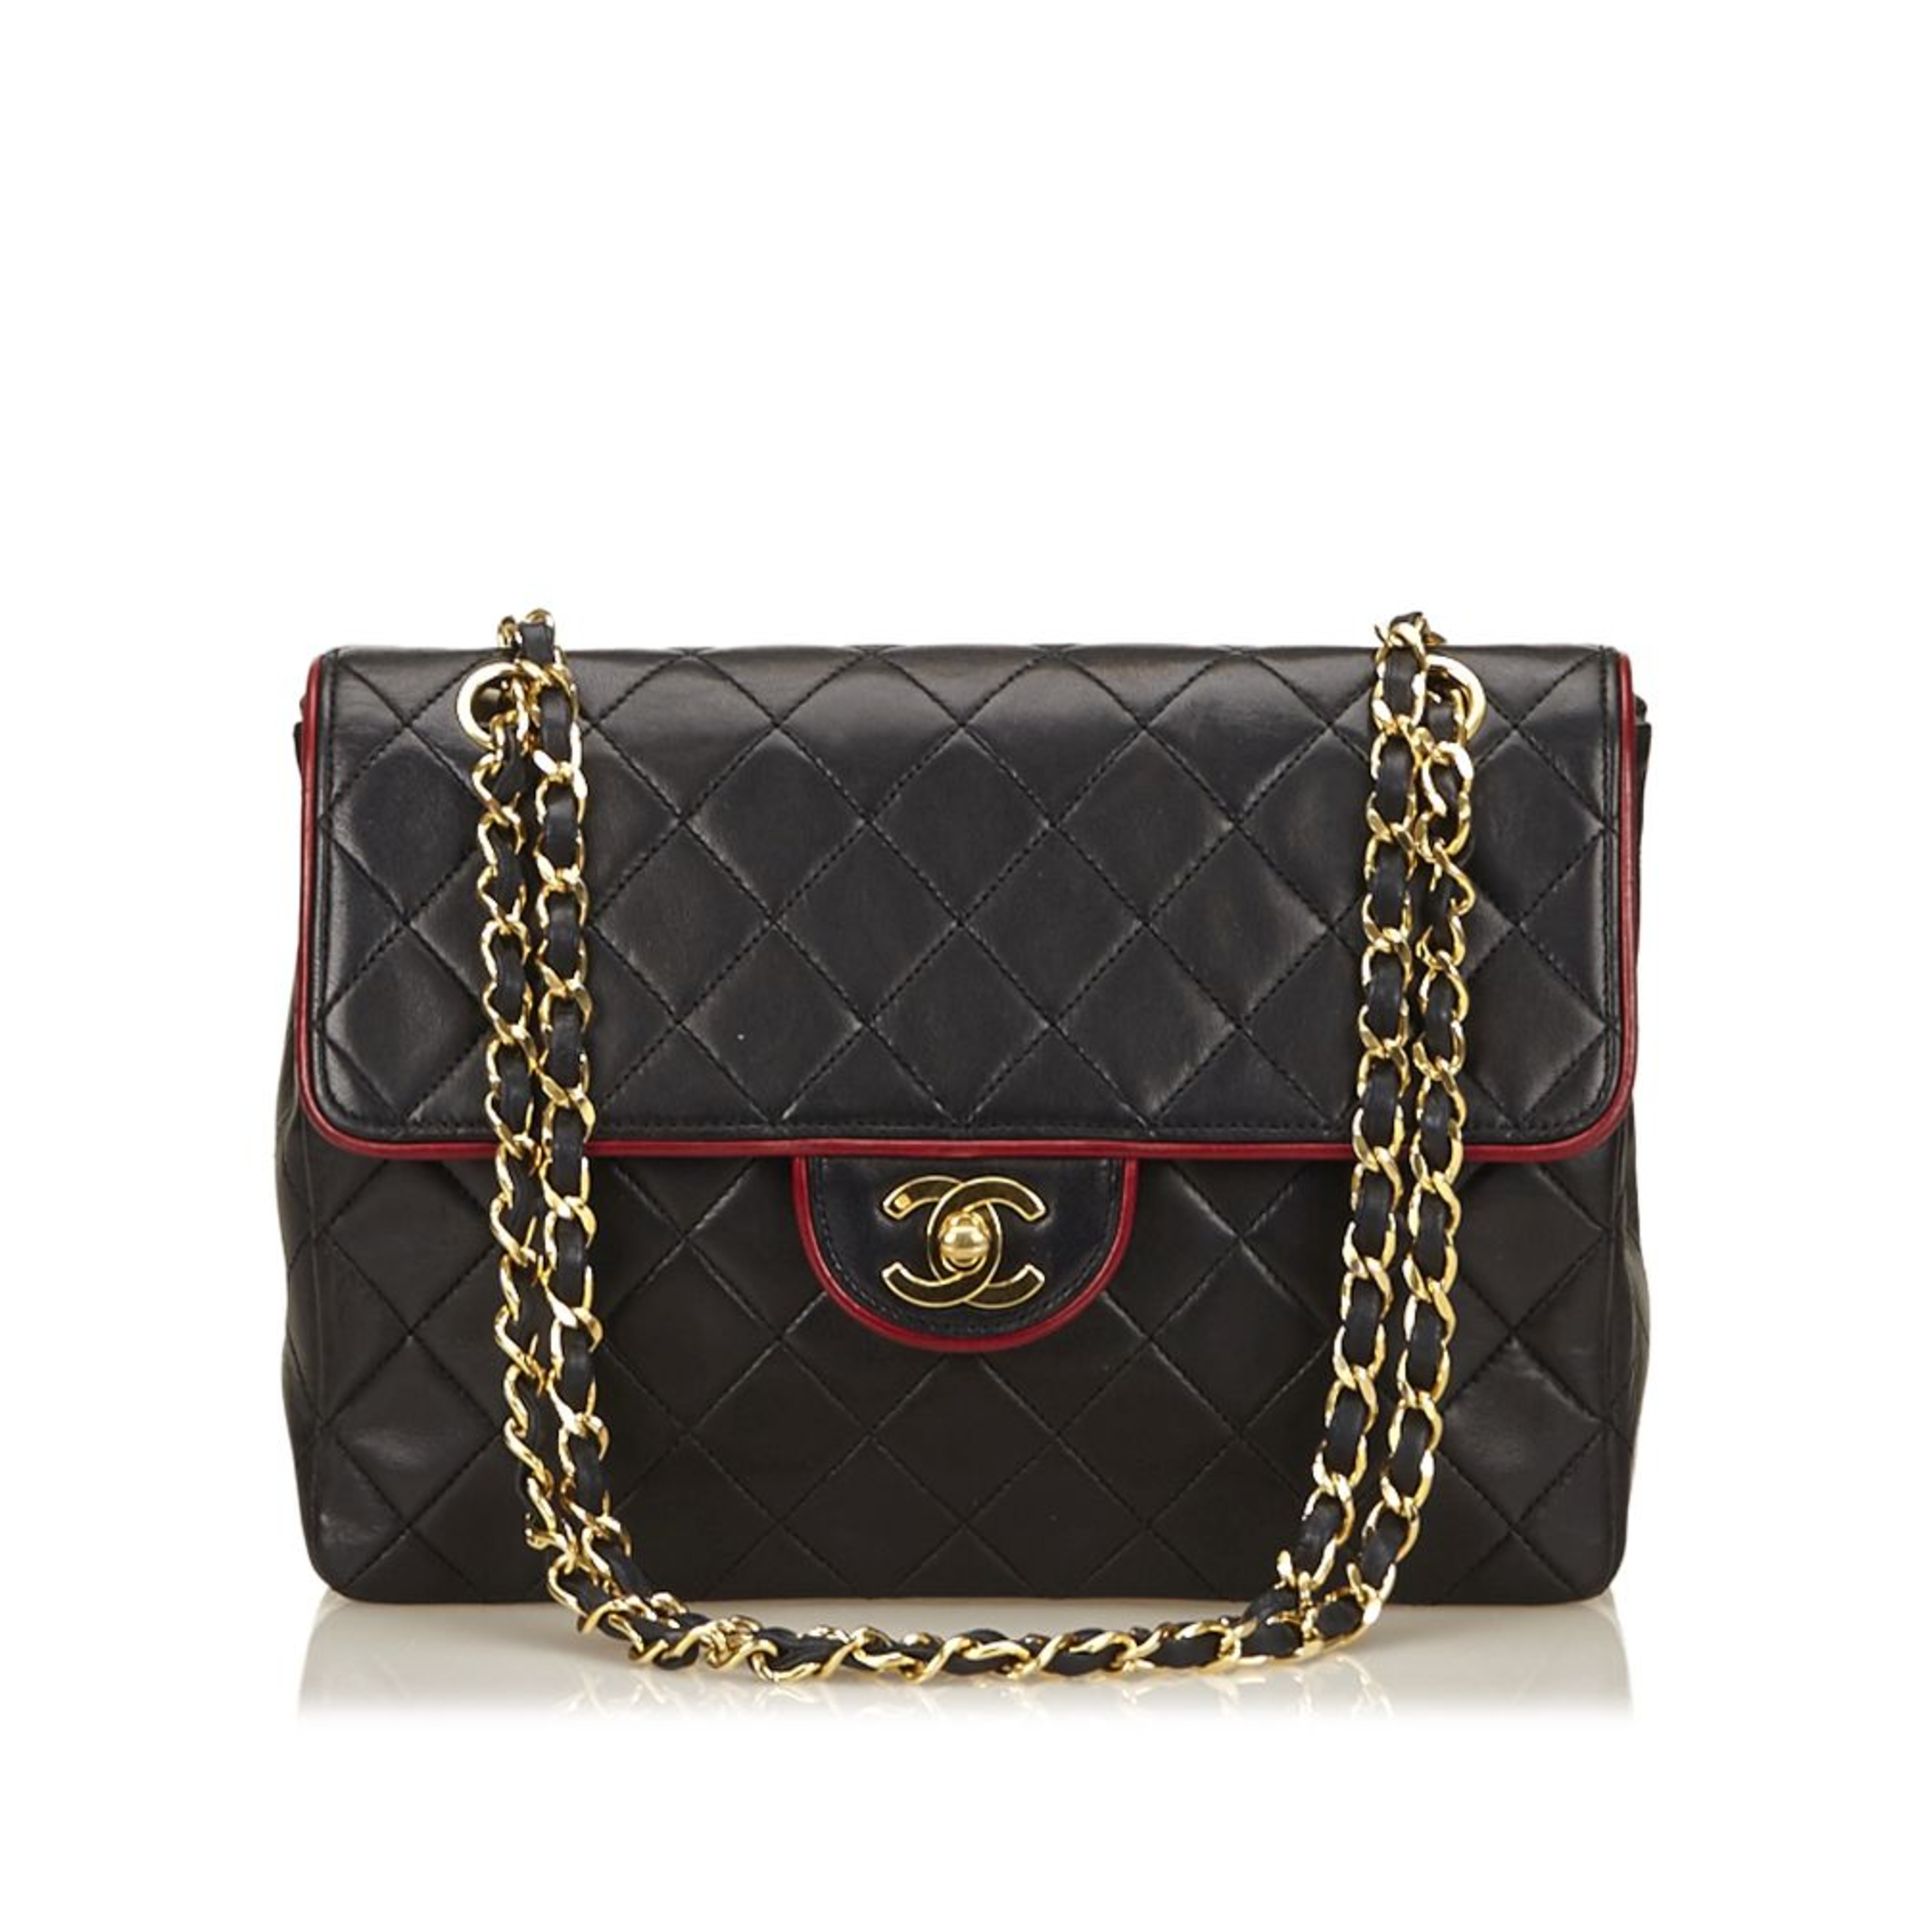 A Chanel quilted leather flap bag,featuring a quilted leather body, a gold-tone shoulder chain,